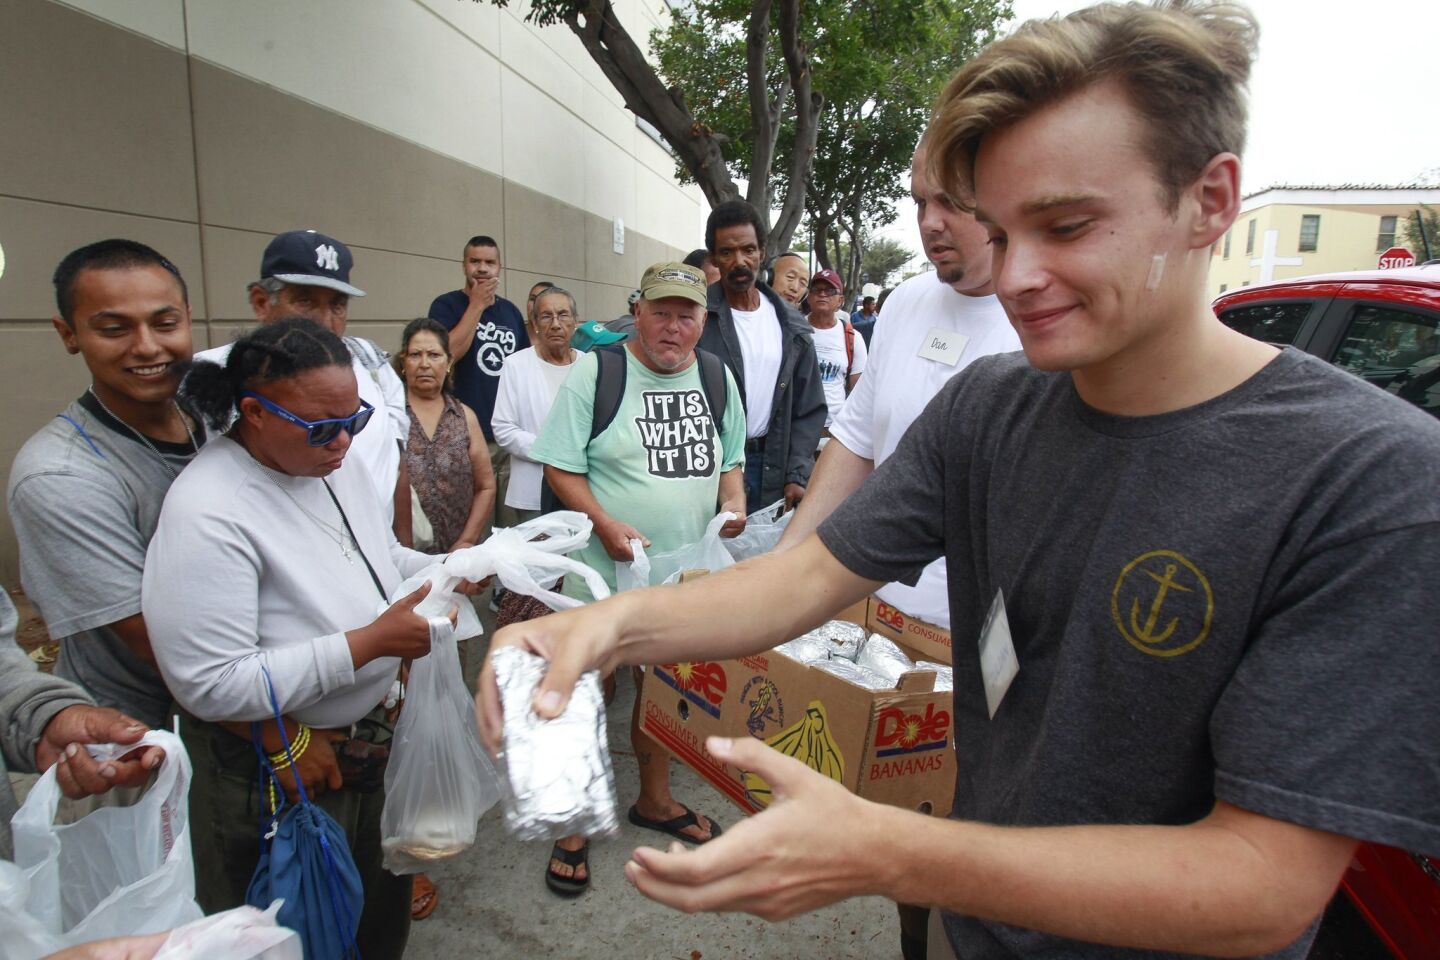 Burrito Boyz member Julian Wahl,18, hands egg burritos out to people, most of them homeless, in downtown San Diego.